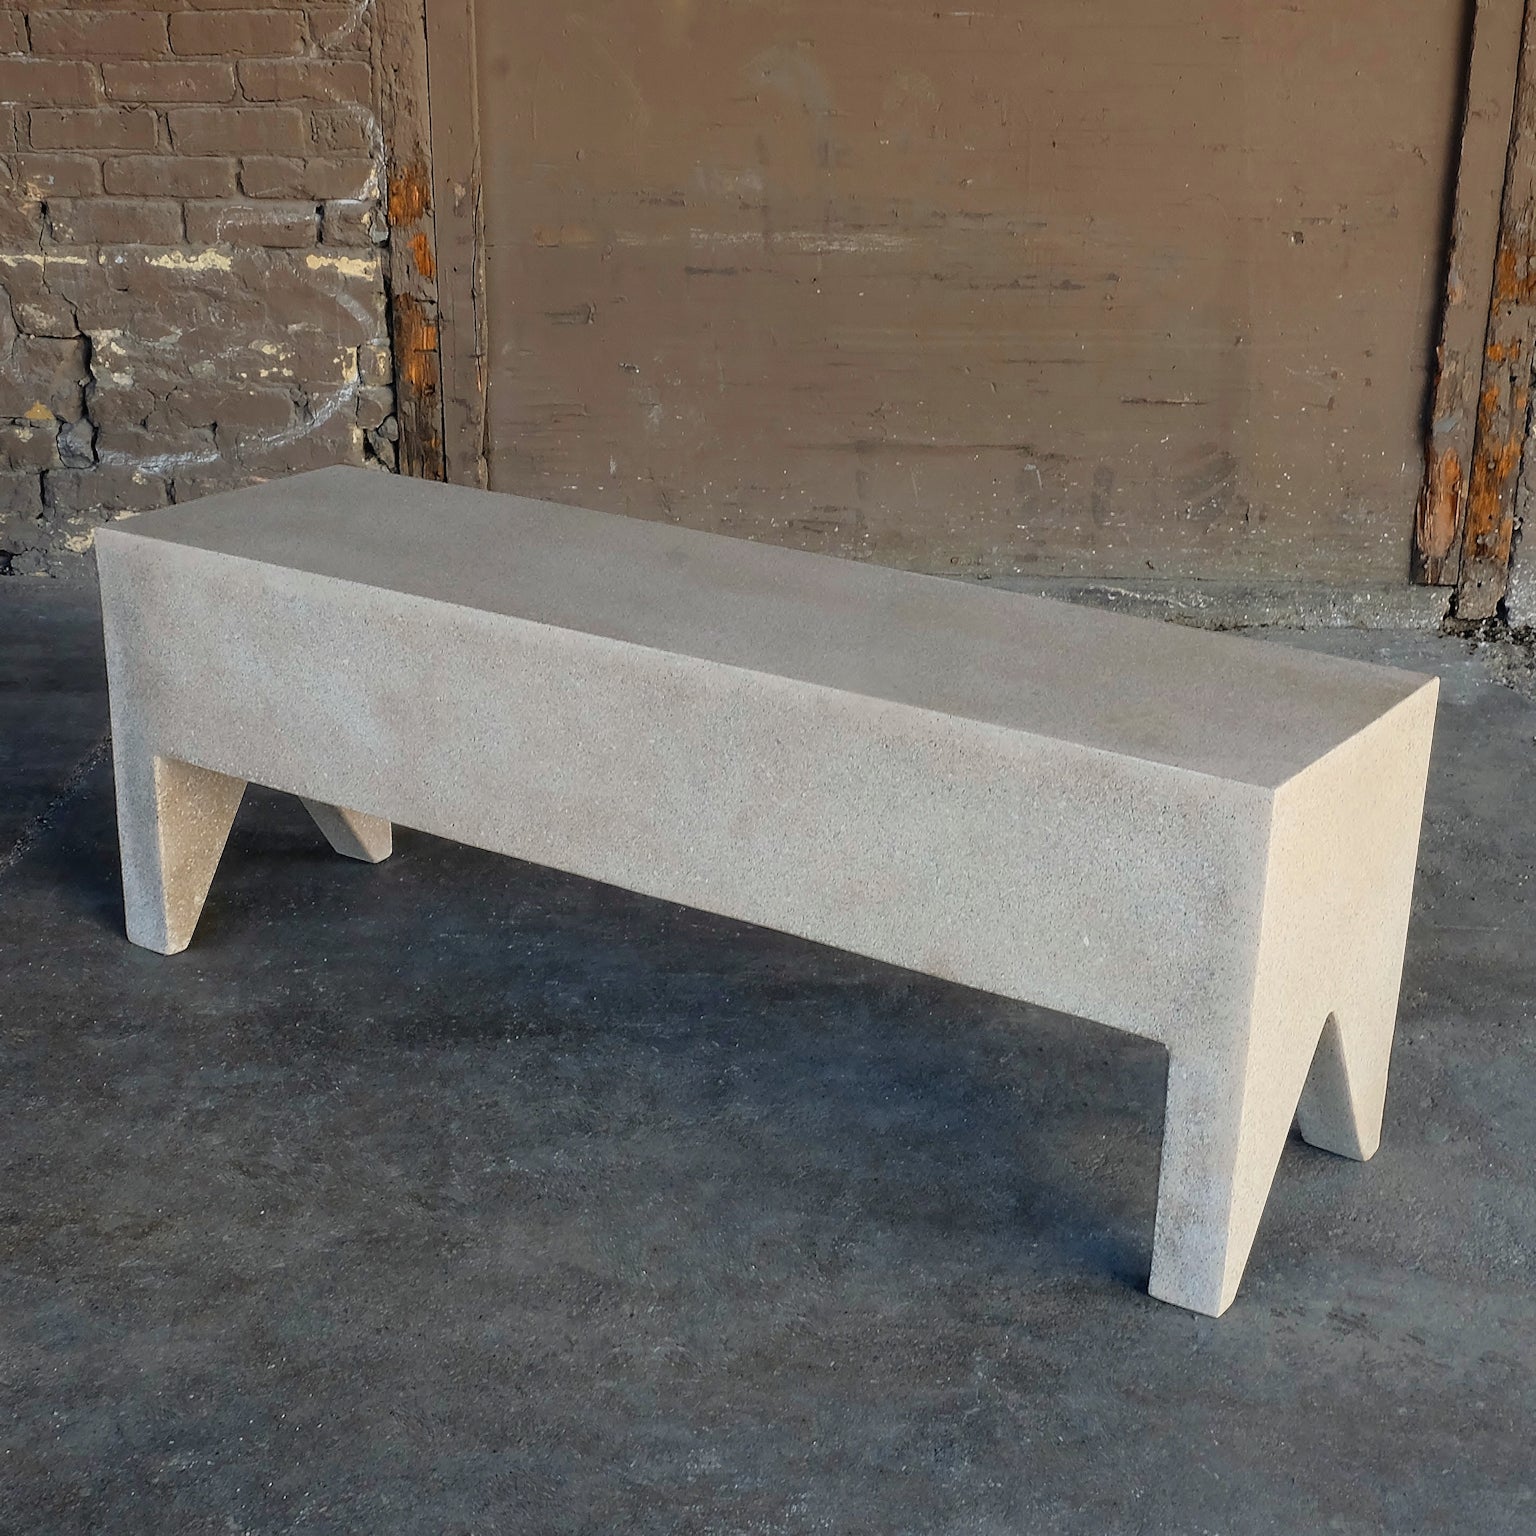 A hint of ornament. Americana at its Brutalist functional extreme.

Dimensions: Width 50 in. (127 cm), depth 14 in. (36 cm), height 18 in. (46 cm). Weight 45 lbs. (20 kg). No assembly required.

Finish color options:
white stone
natural